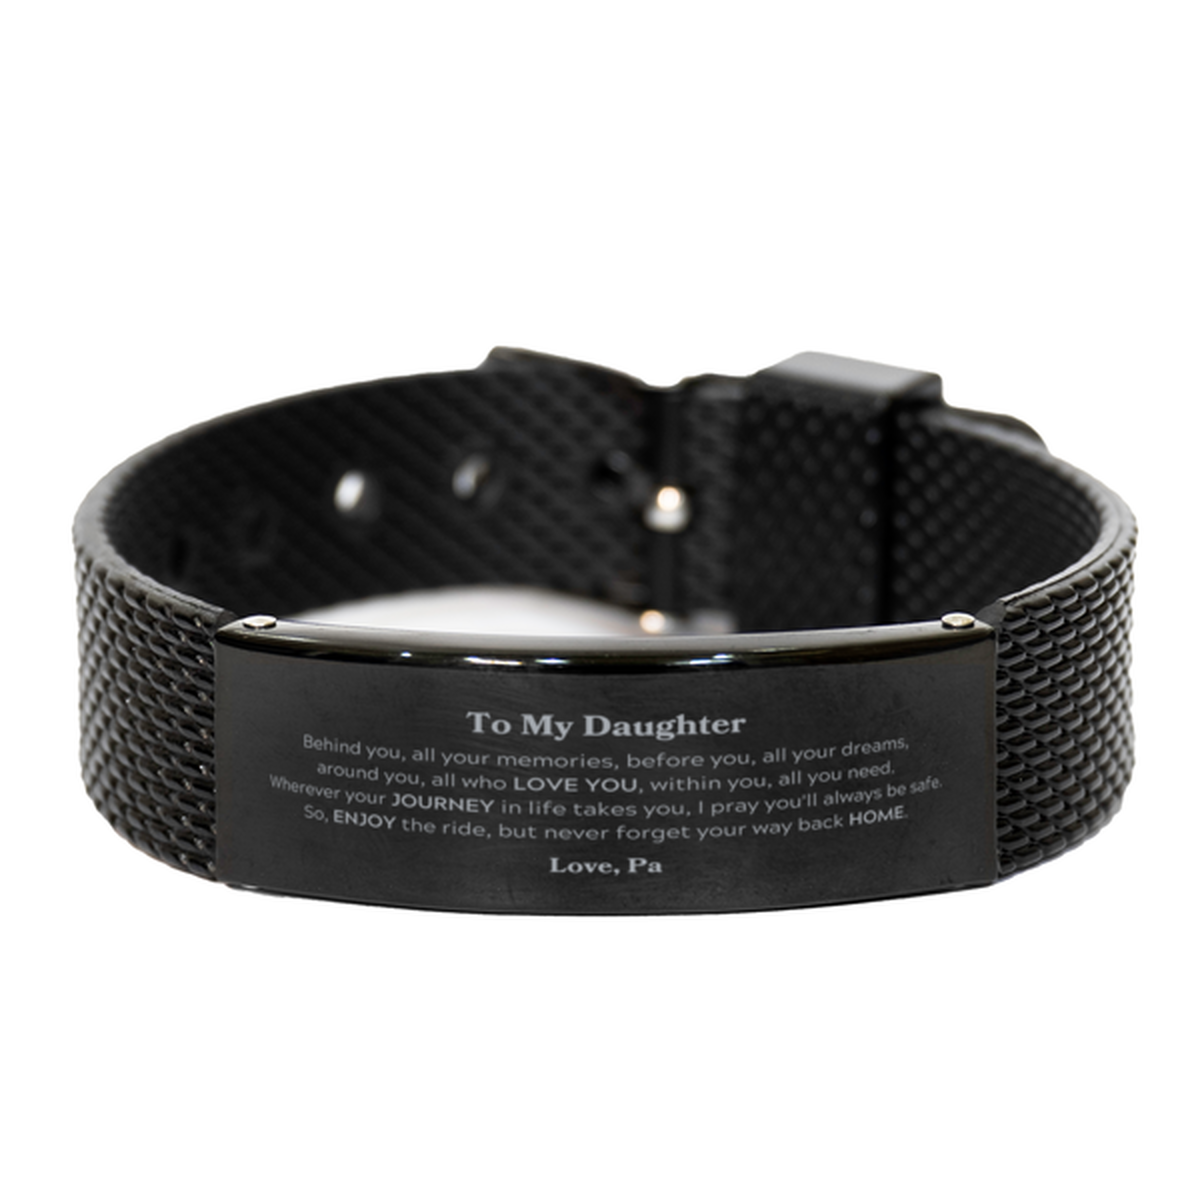 To My Daughter Graduation Gifts from Pa, Daughter Black Shark Mesh Bracelet Christmas Birthday Gifts for Daughter Behind you, all your memories, before you, all your dreams. Love, Pa